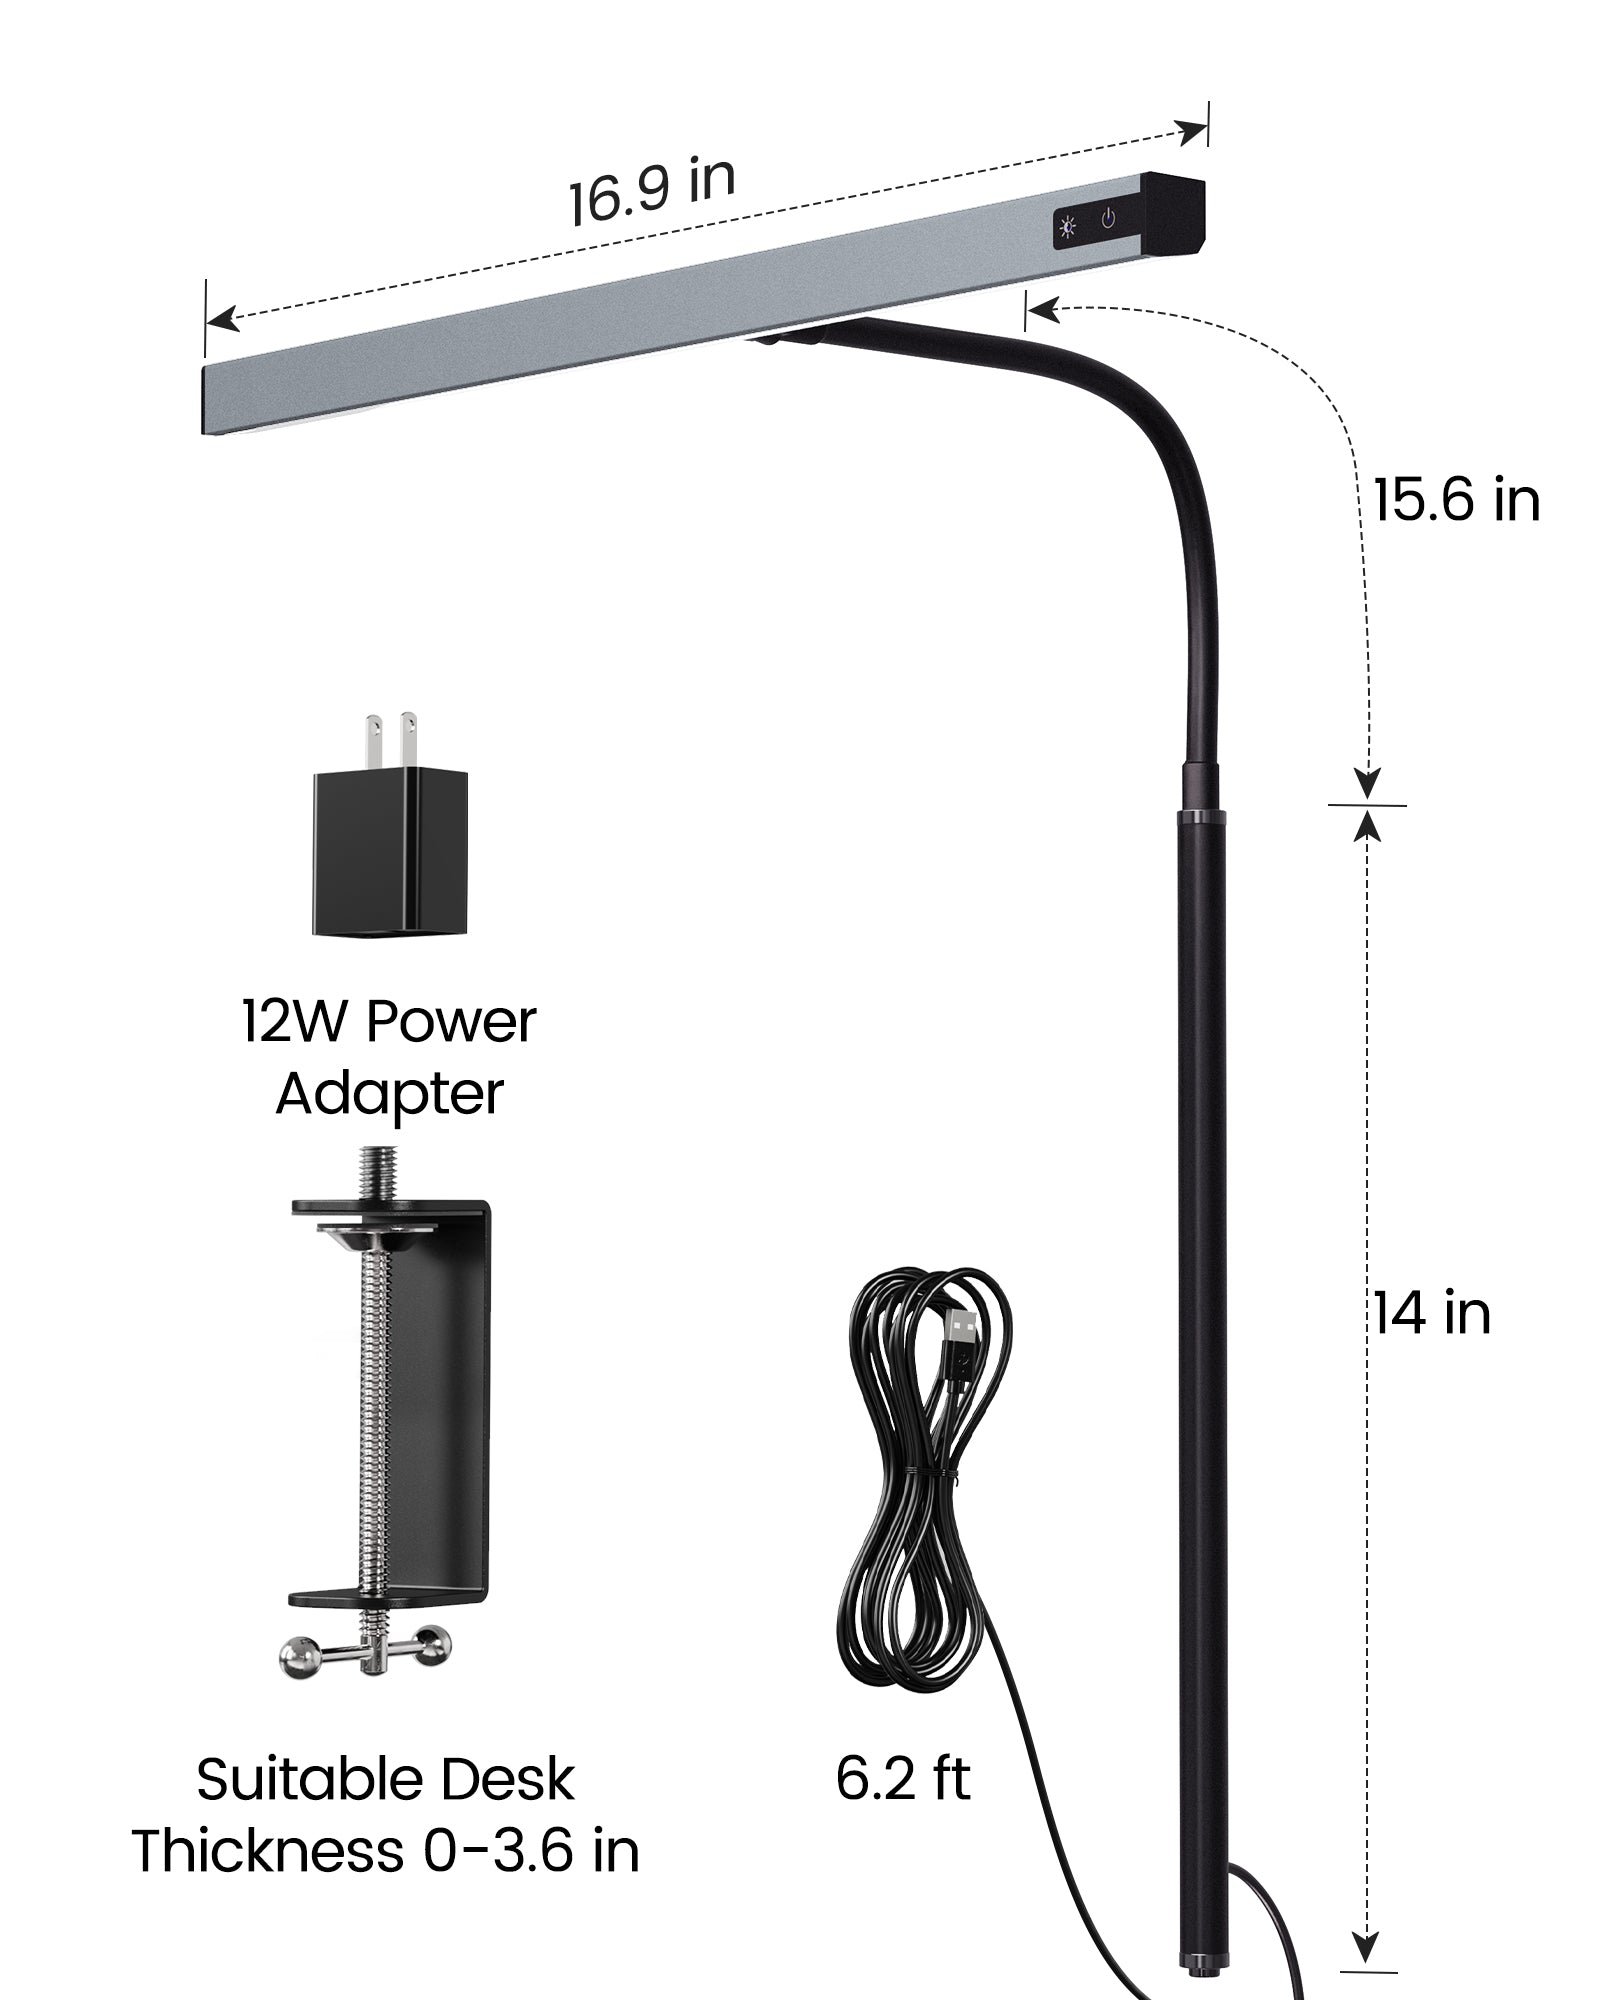 SUPERDANNY LED Desk Lamp for Home Office, Eye-Caring Desk Light with Adjustable Gooseneck, 12W Touch Control Dimmable Brightness, Architect Clamp Lamp with USB Adapter Grey